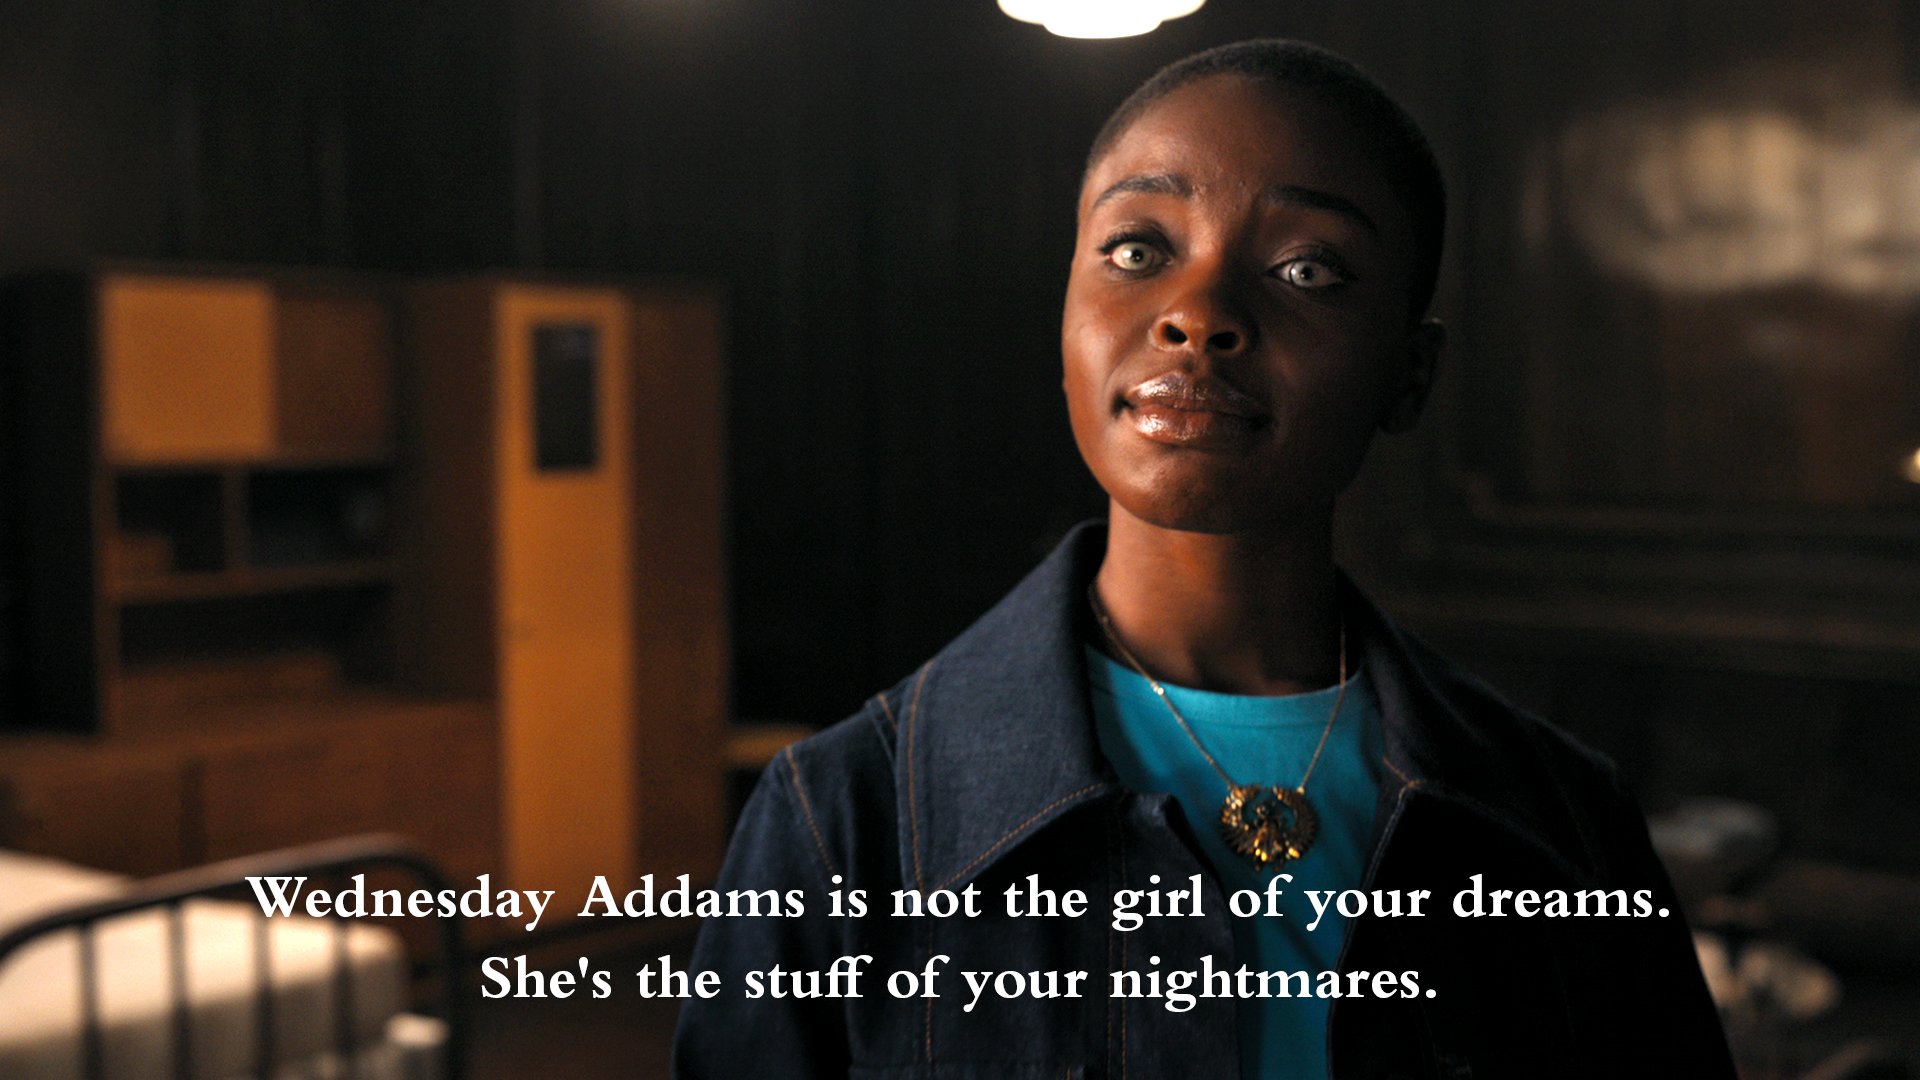 Netflix's Wednesday has some great quotes.